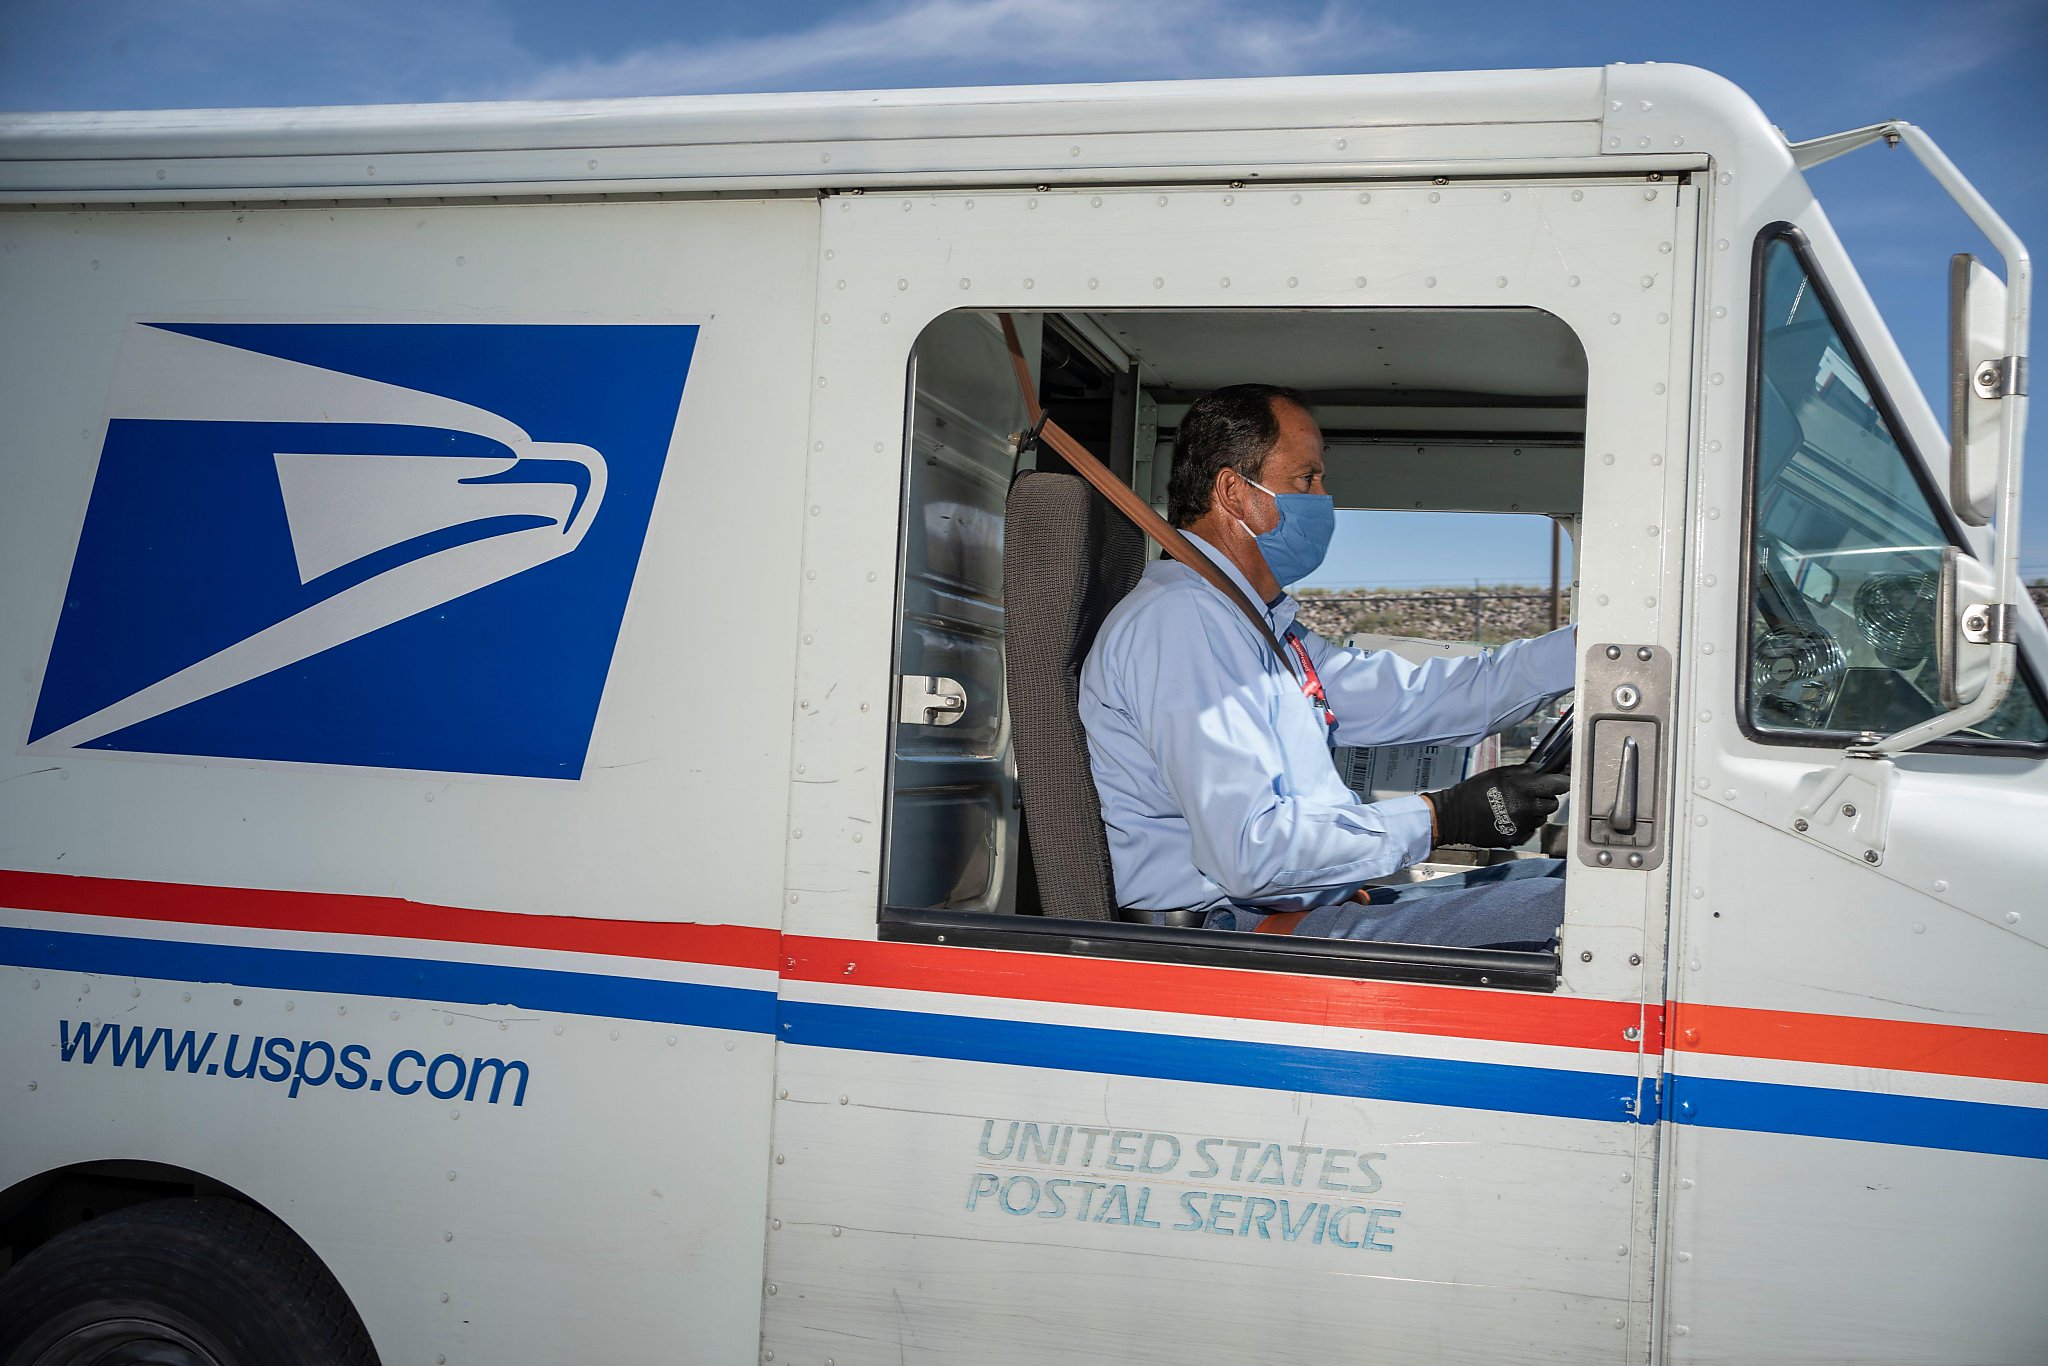 Some USPS mail will take longer to deliver in San Antonio starting Friday